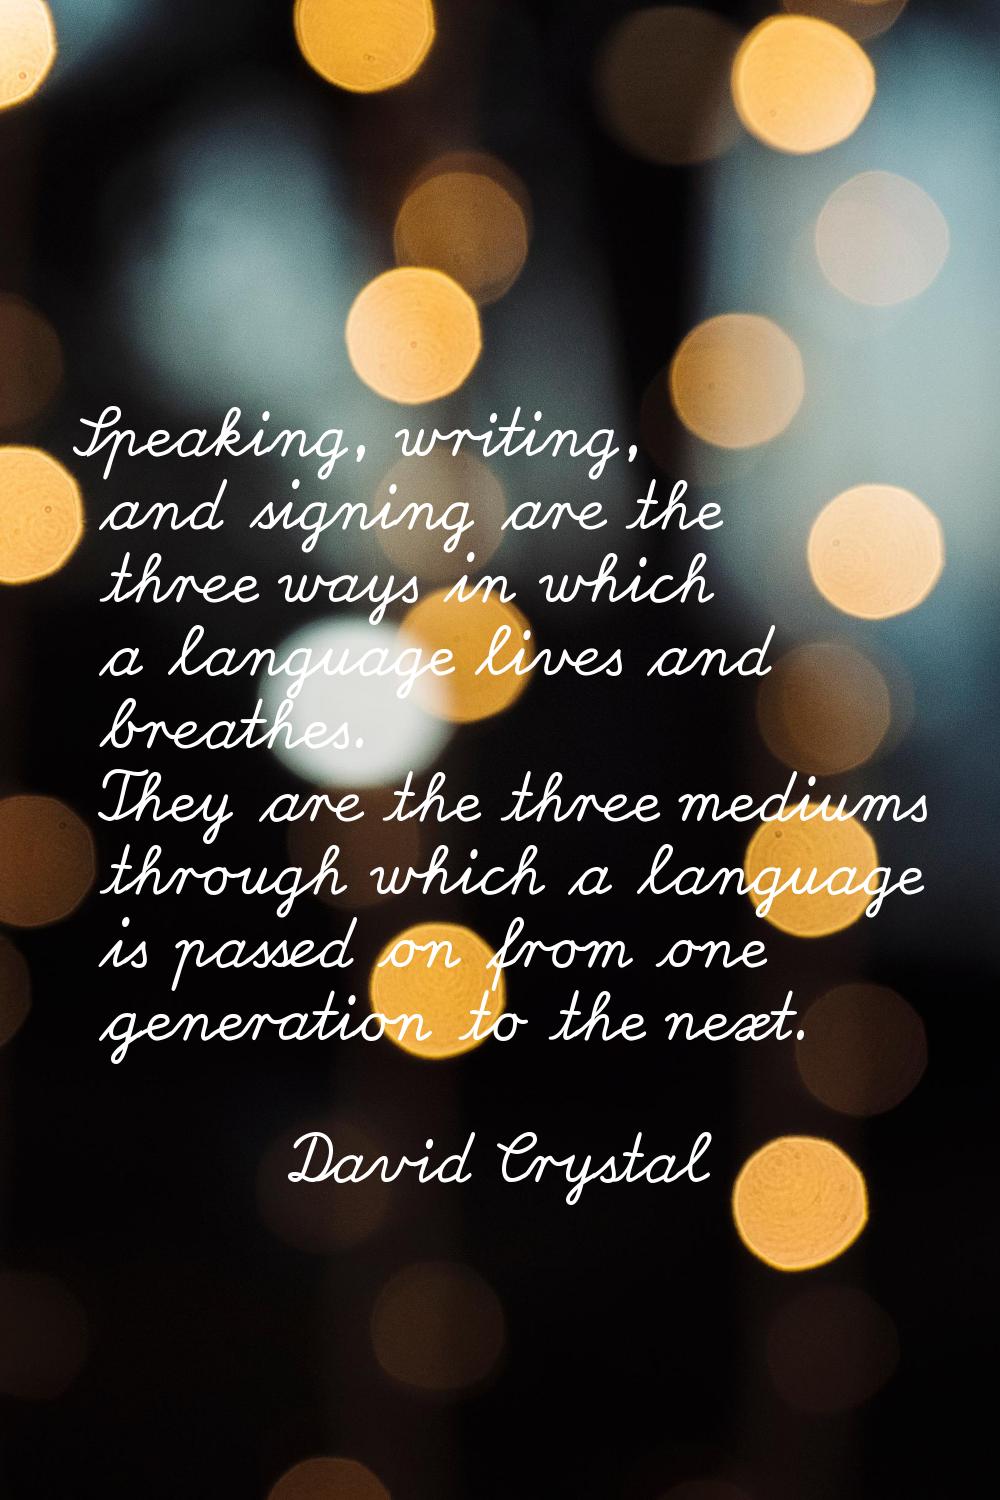 Speaking, writing, and signing are the three ways in which a language lives and breathes. They are 